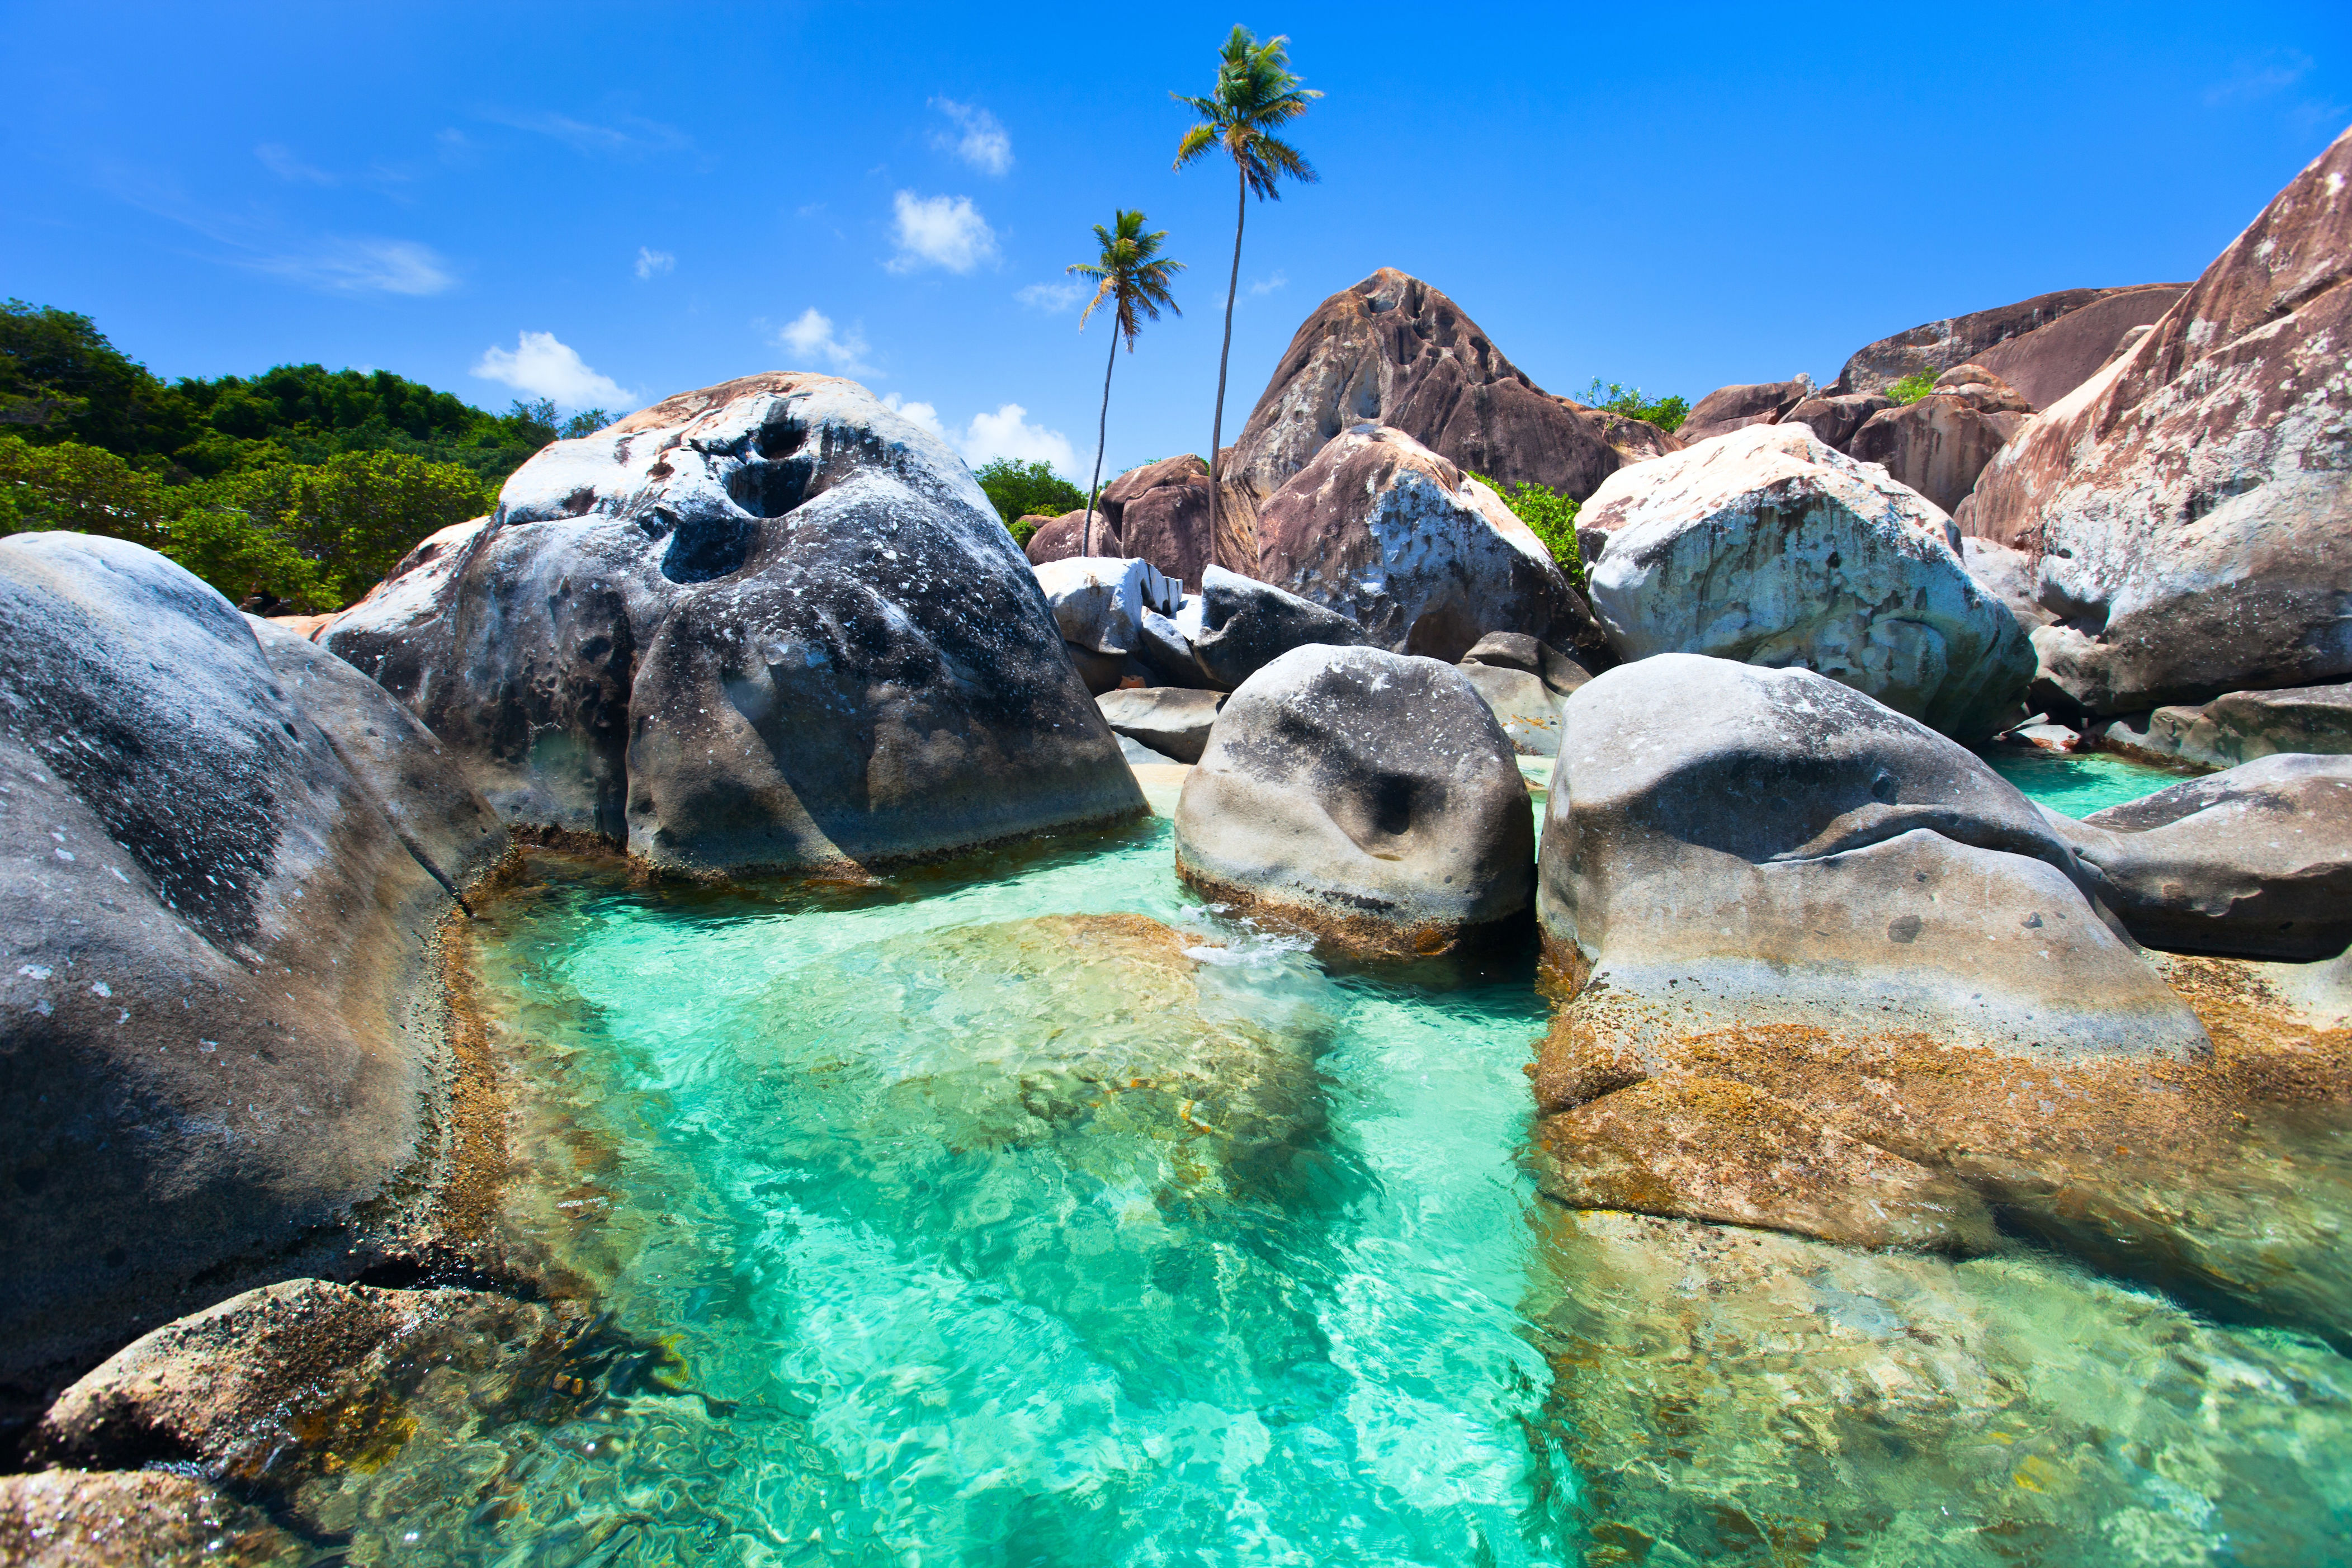 <p>Virgin Gorda is the third-largest of the British Virgin Islands, with natural beauty covering virtually all of its 8.5 square miles. The island offers quiet beaches, coves, and flora-filled national parks.</p> <p>Perhaps the prettiest and most popular attraction is the Baths, pictured, a seaside area where huge granite boulders form scenic saltwater pools and grottos.</p><p>Sign up to receive the latest news, expert tips, and inspiration on all things travel</p><a href="https://www.cntraveler.com/newsletter/the-daily?sourceCode=msnsend">Inspire Me</a>